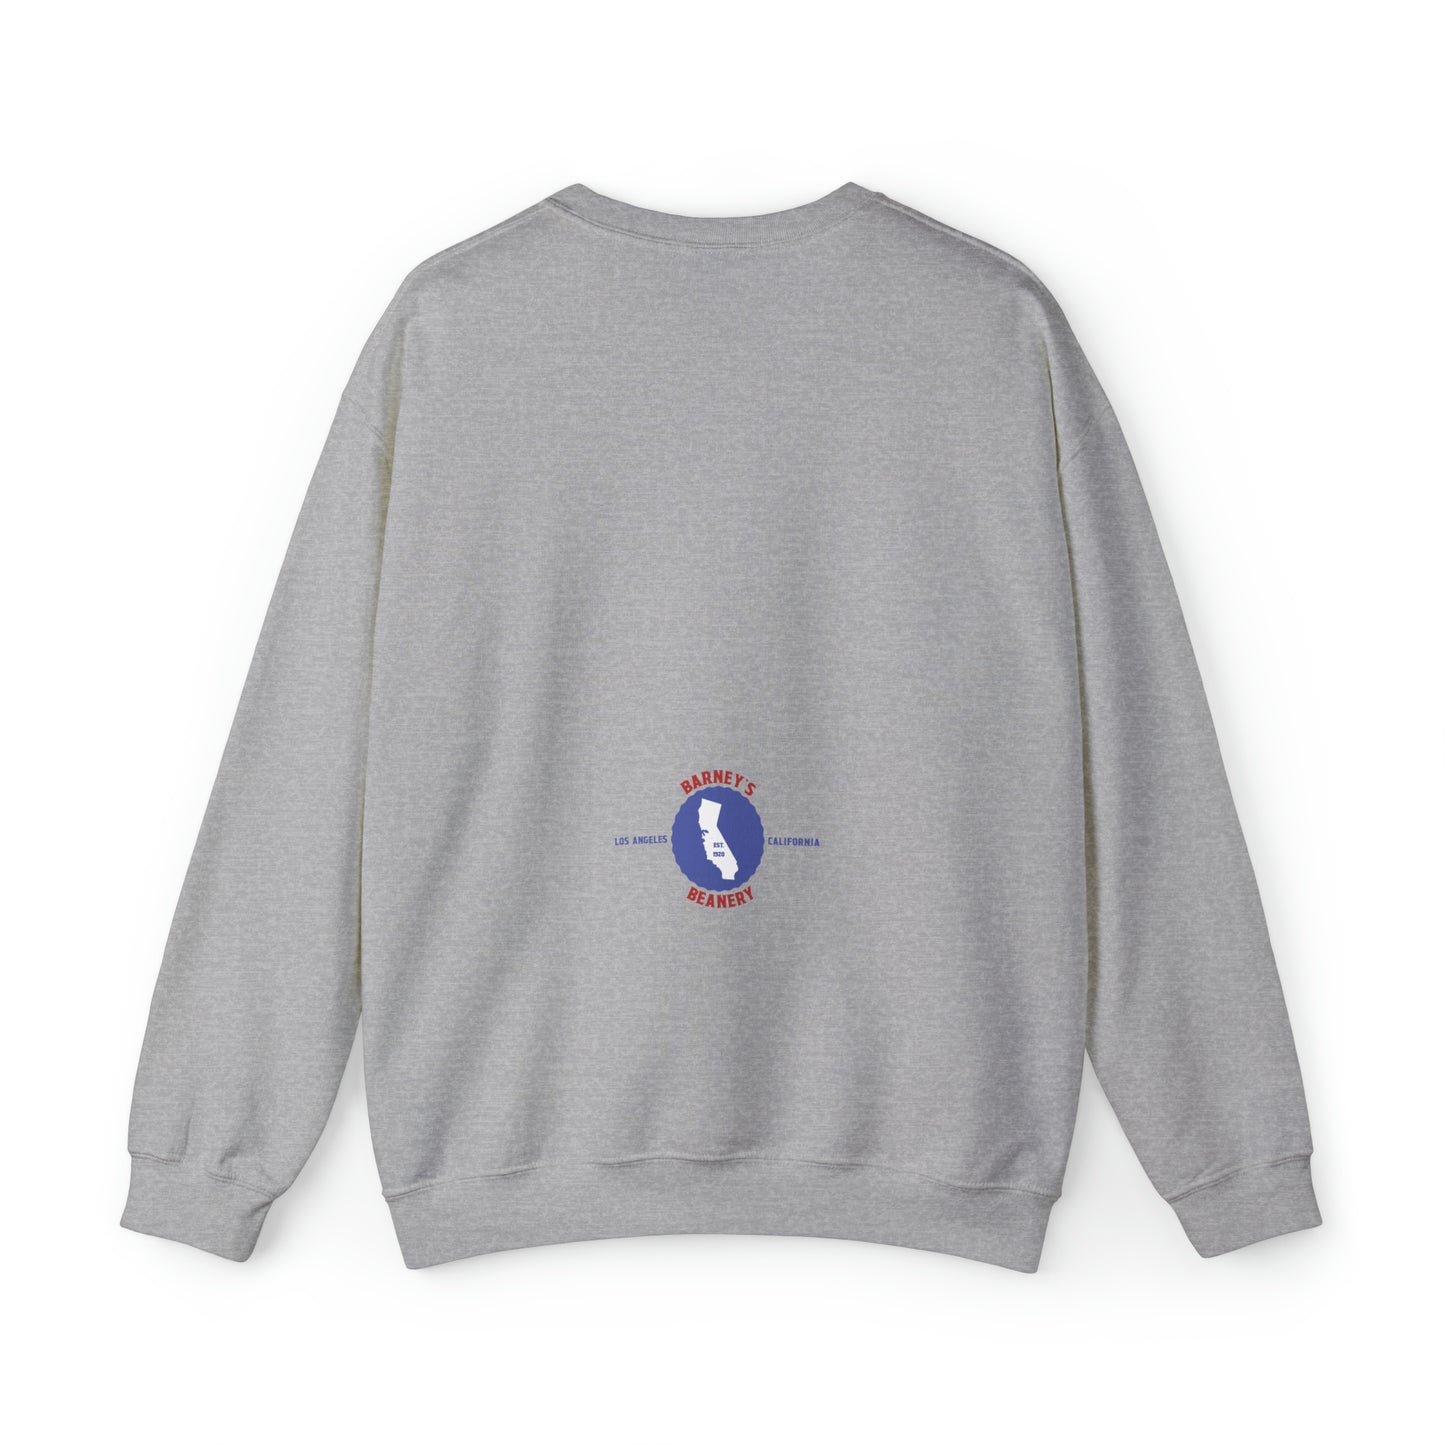 Eat More Chili. Drink More Beer. | BARNEY'S BEANERY Red & Blue - Women's Retro Graphic Sweatshirt